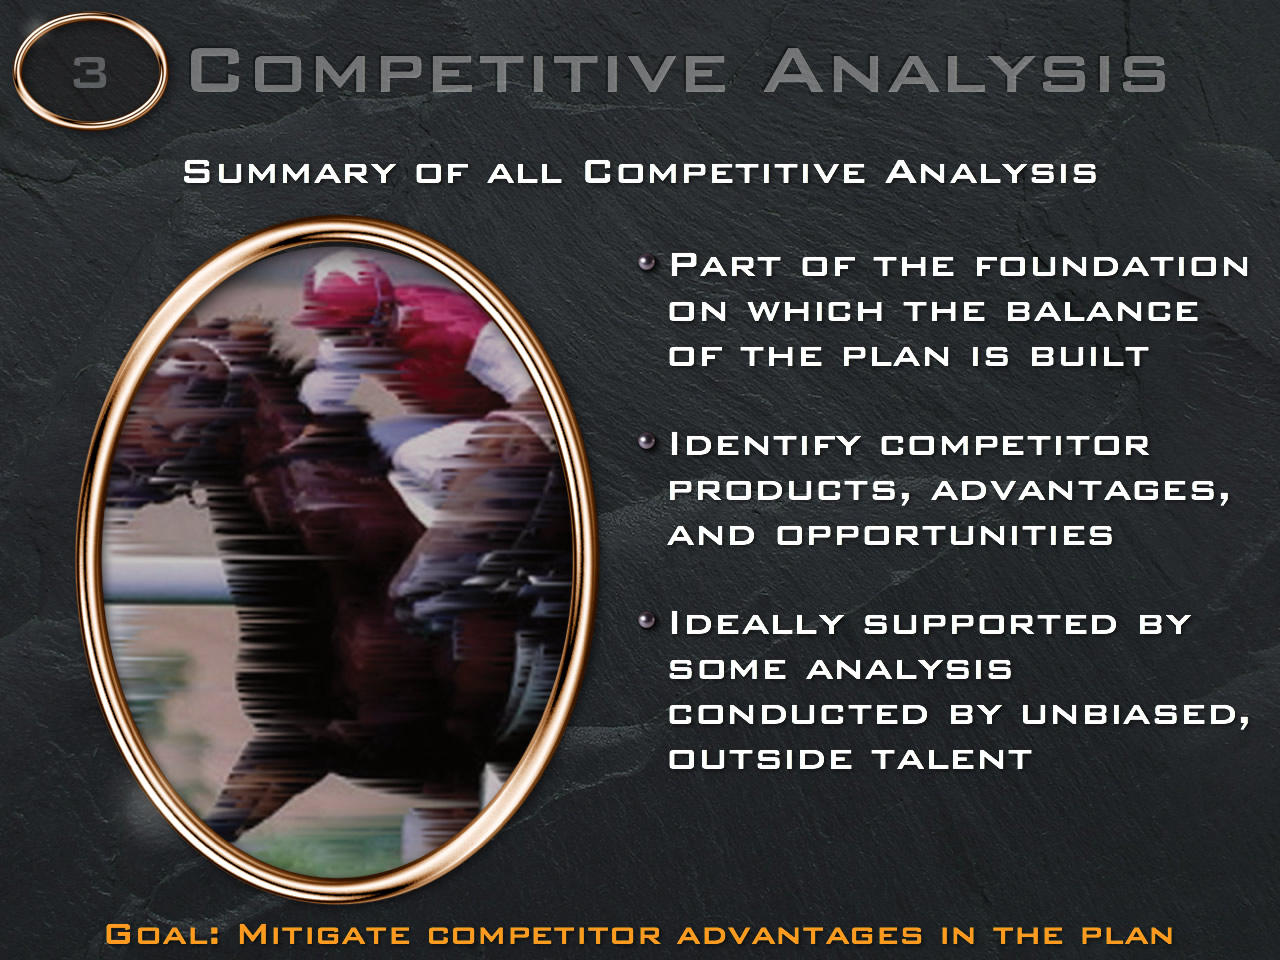 Using advanced competitive analysis to help create a quality stratgic business plan